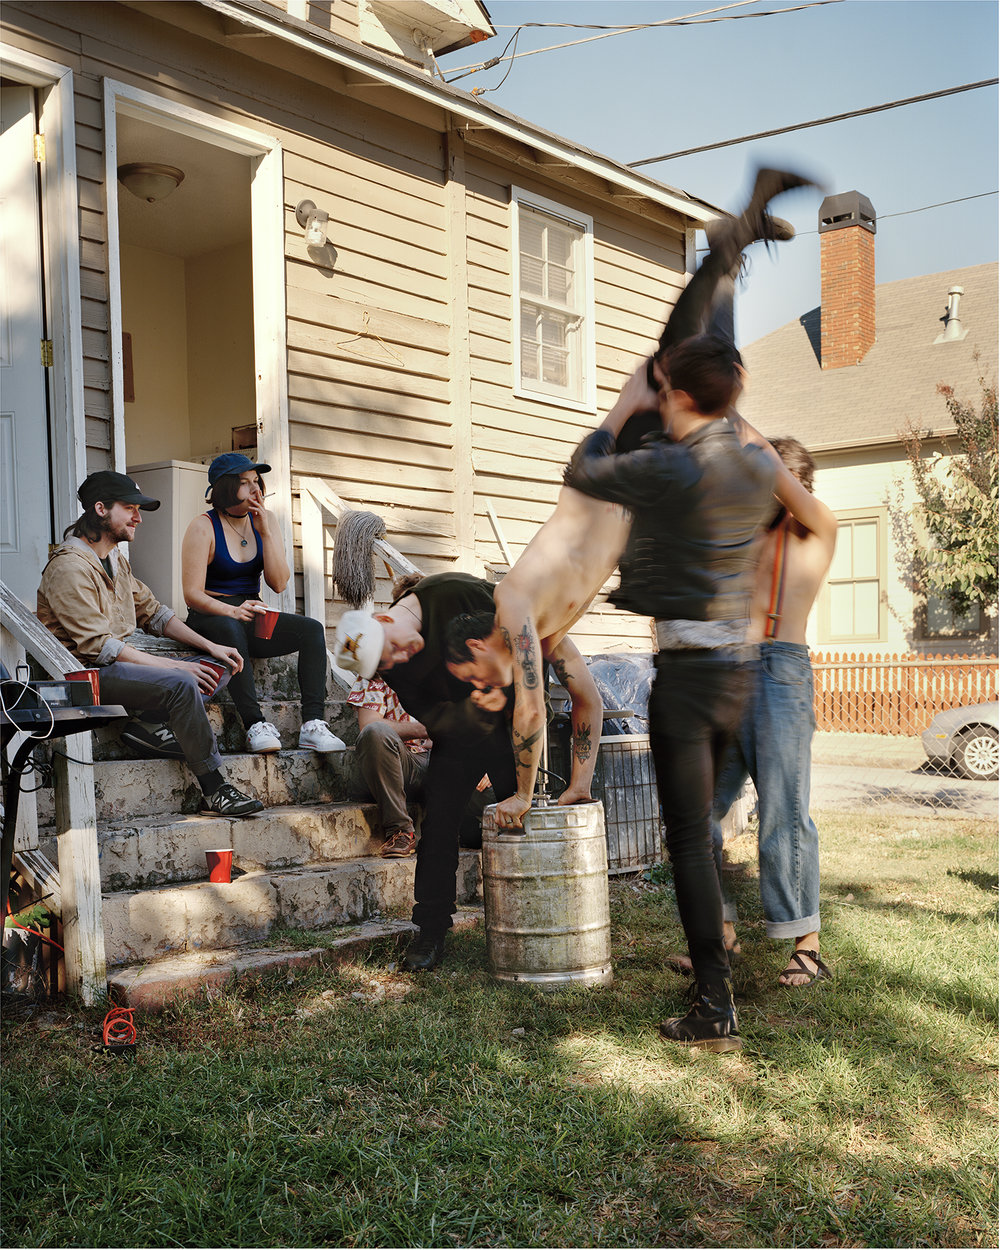   Kegstand Cabbagetown North , 2016 Archival inkjet print 11 x 14 in. (image size) The Do Good Fund, Inc., 2019-009 